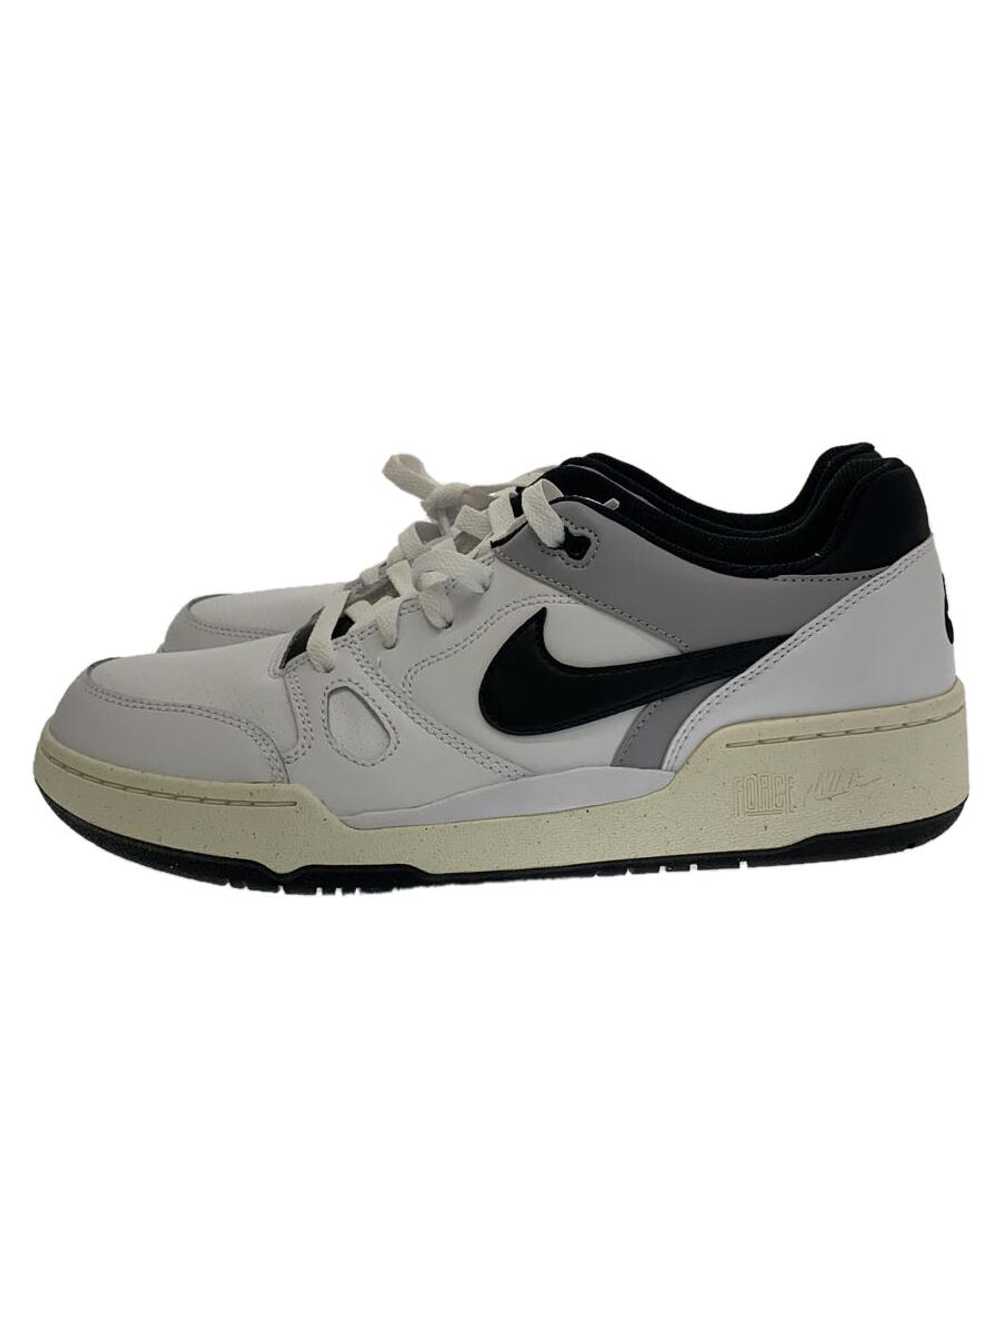 Nike Full Force Low Low/White Shoes US10 J7J62 - image 1